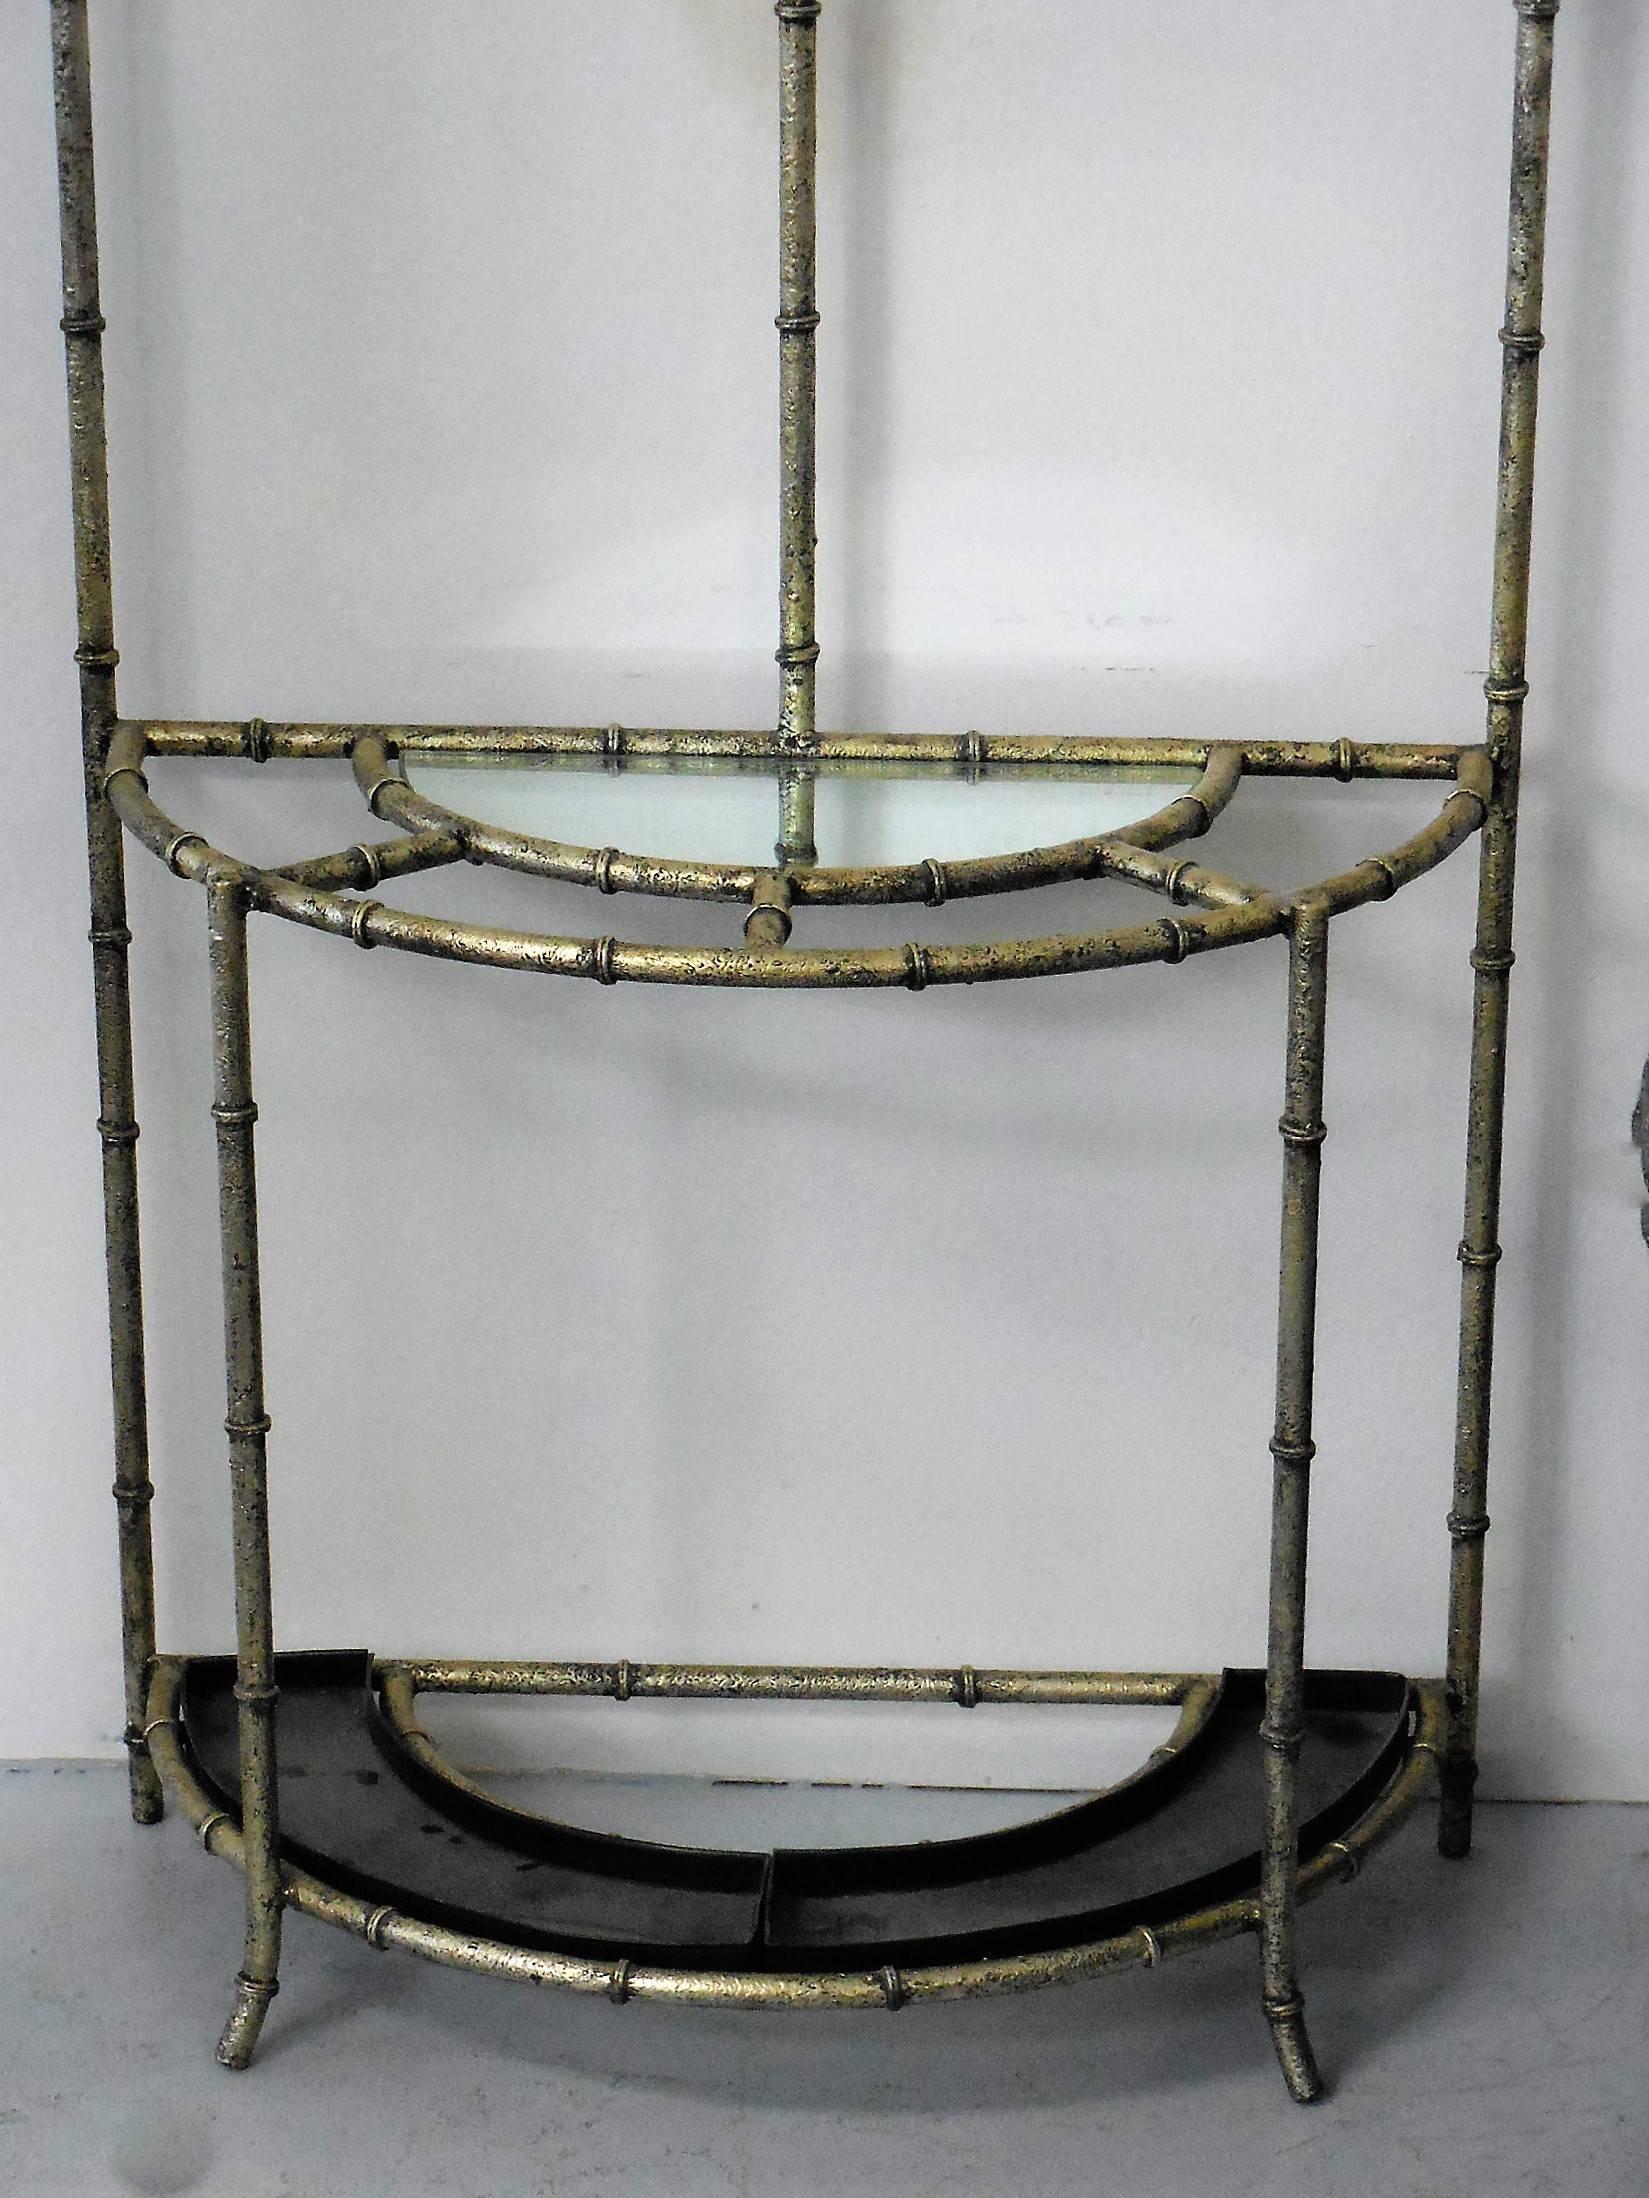 Rare and beautiful hall tree. It is metal with a thick silver enamel finish. There are three stylized hooks around the round looking glass. The console top is mirror as well.